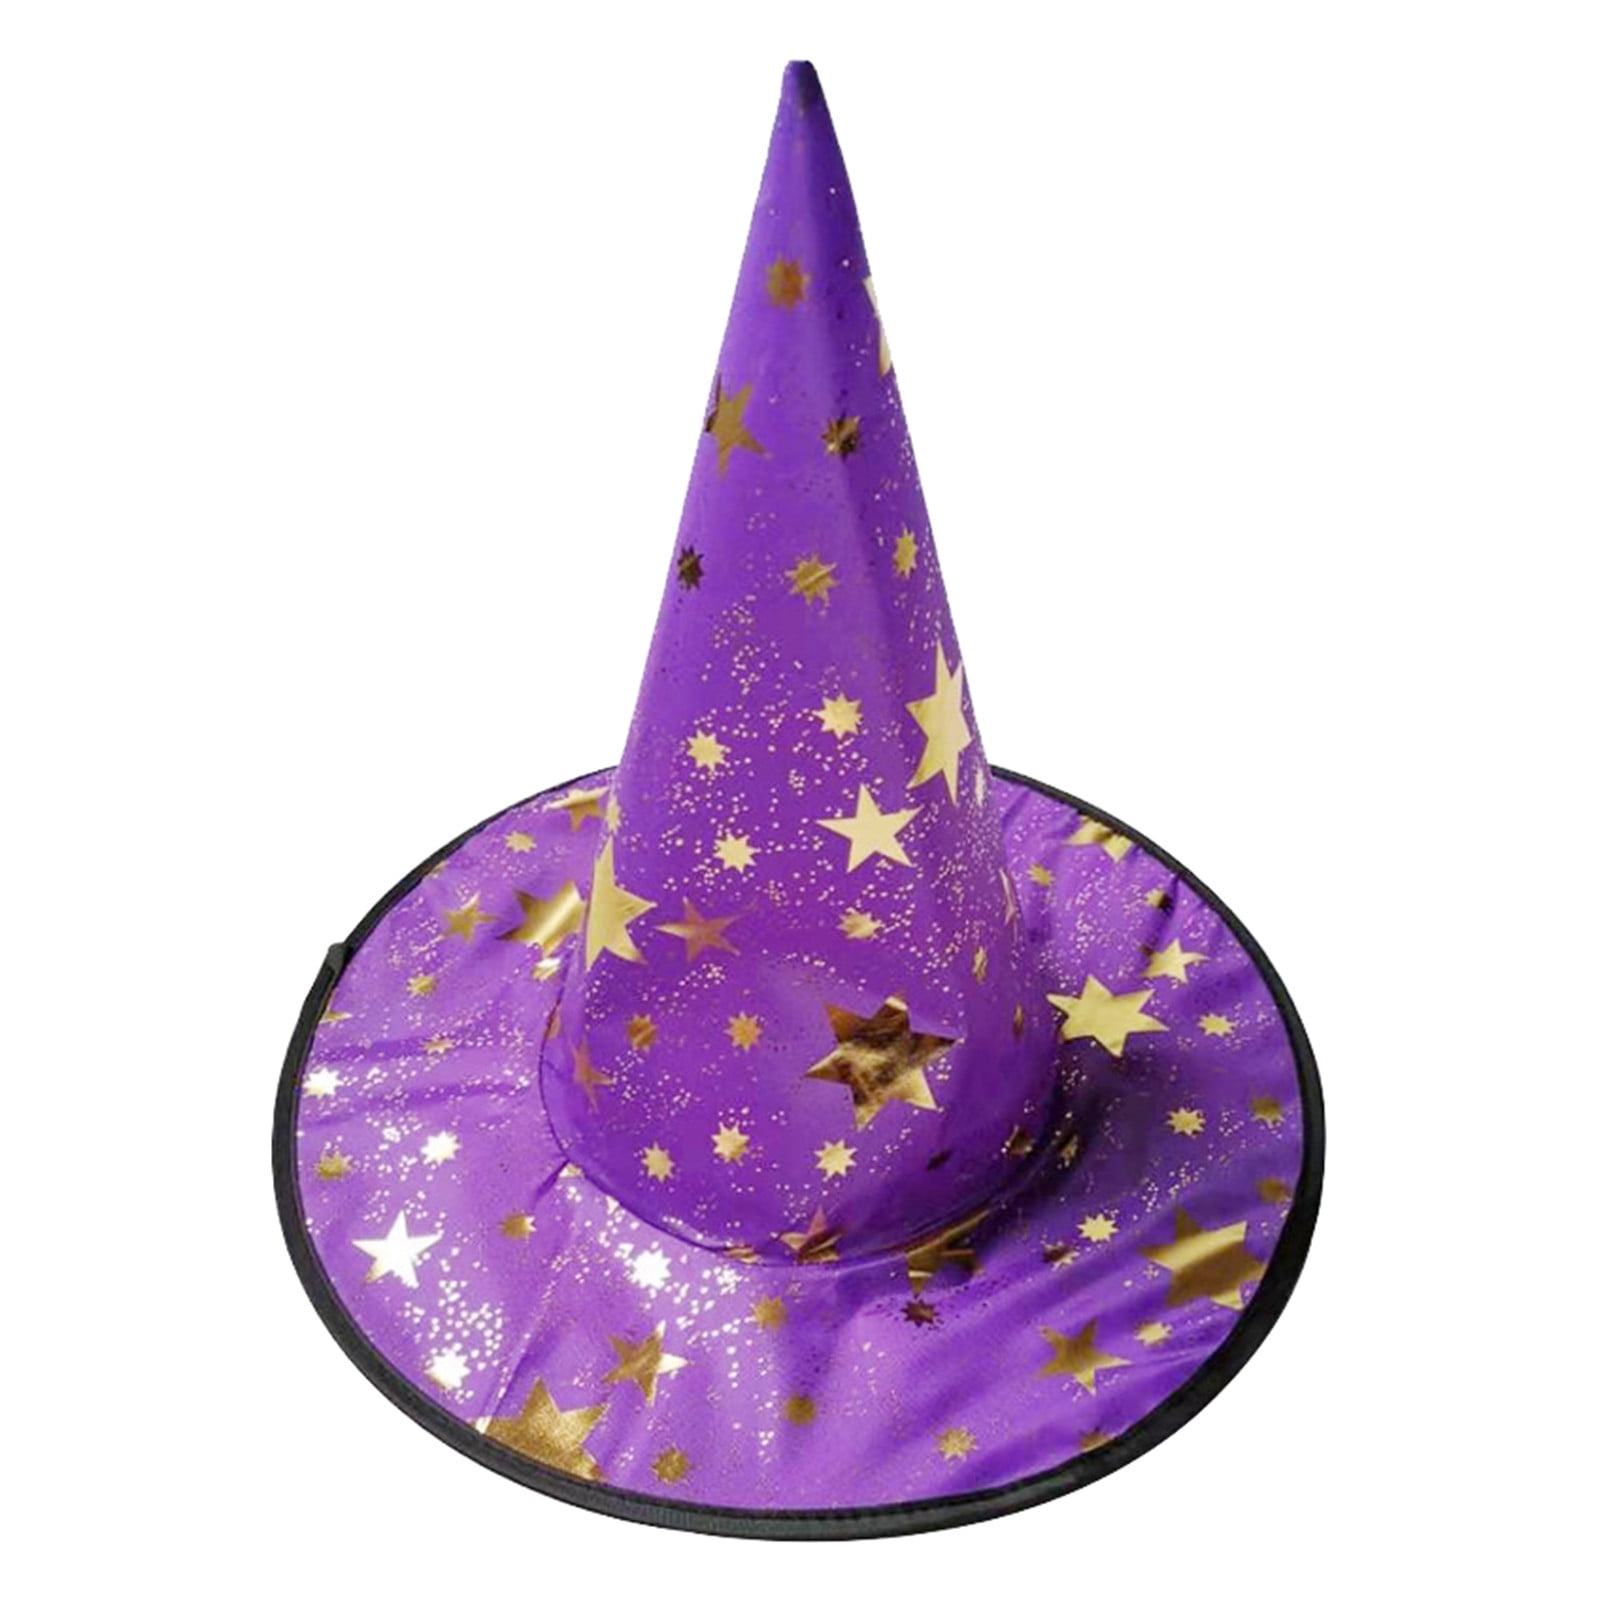 Adult Womens Witch Hat for Halloween Costume Accessory Goldtone Star Print Magic Pointed Wizard Cap